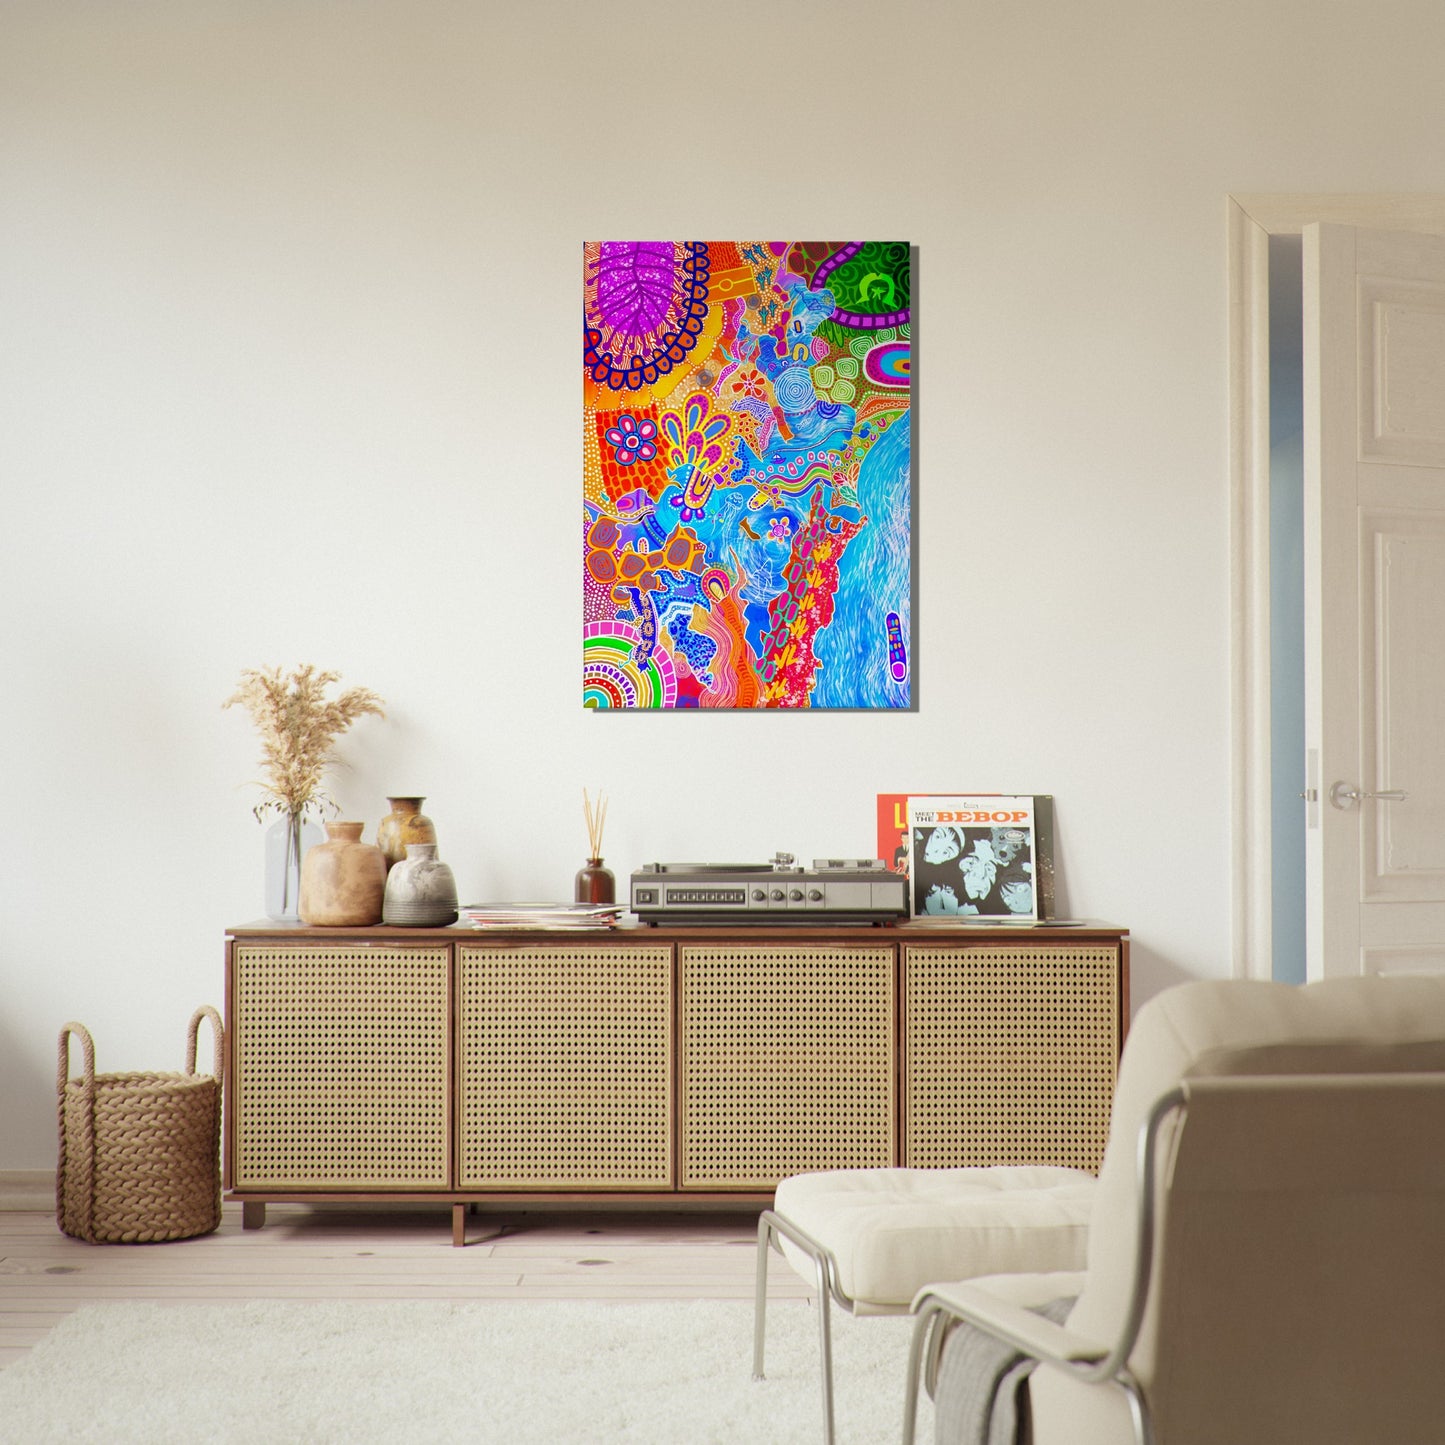 Aboriginal Art | Lake Macquarie | Print to Canvas | Limited Release